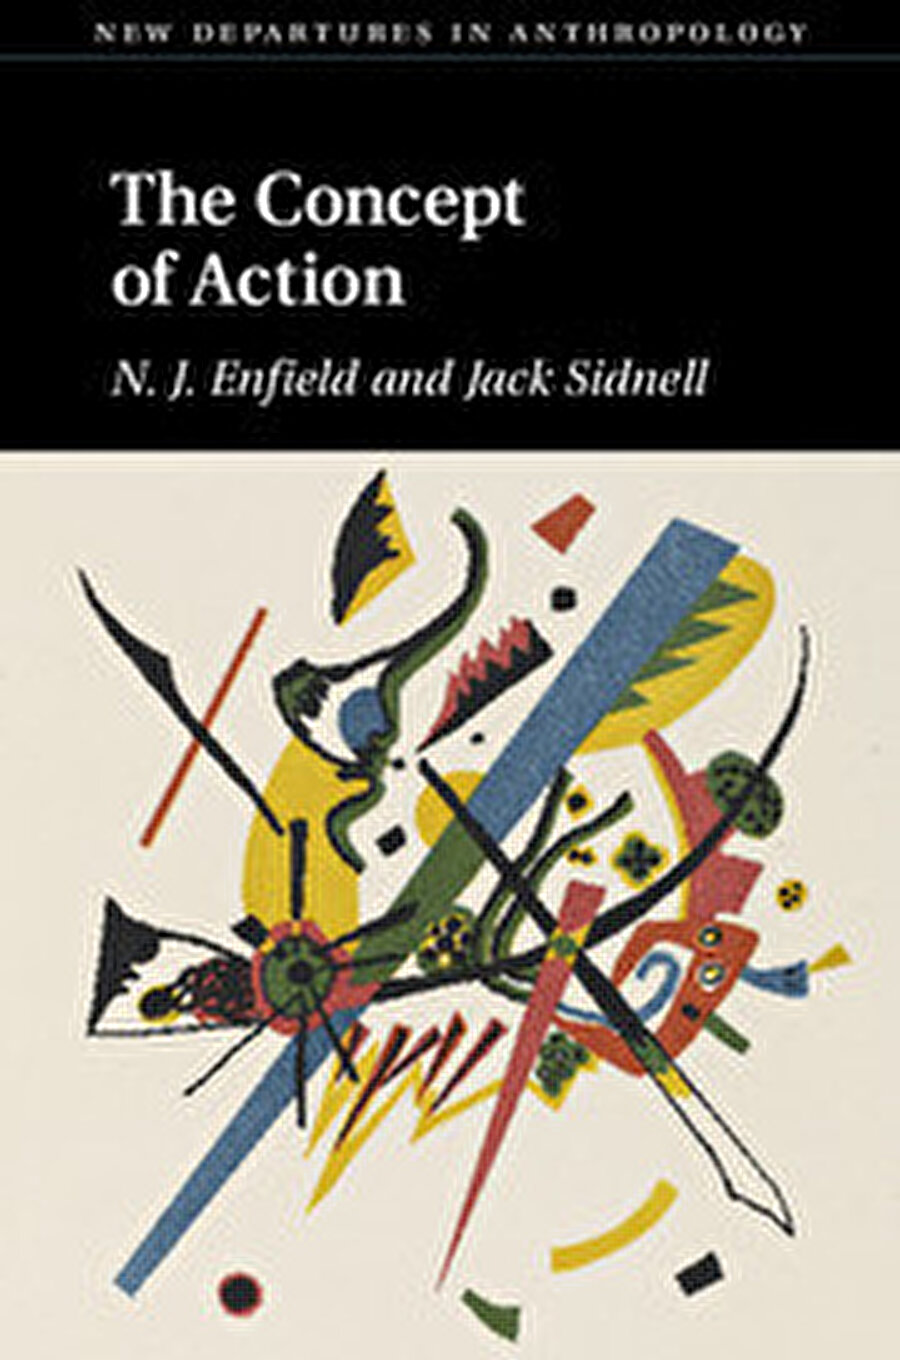 The Concept of Action, N. J. Enfield, Jack Sidnell, Cambridge University Press, 217 s., 2017.